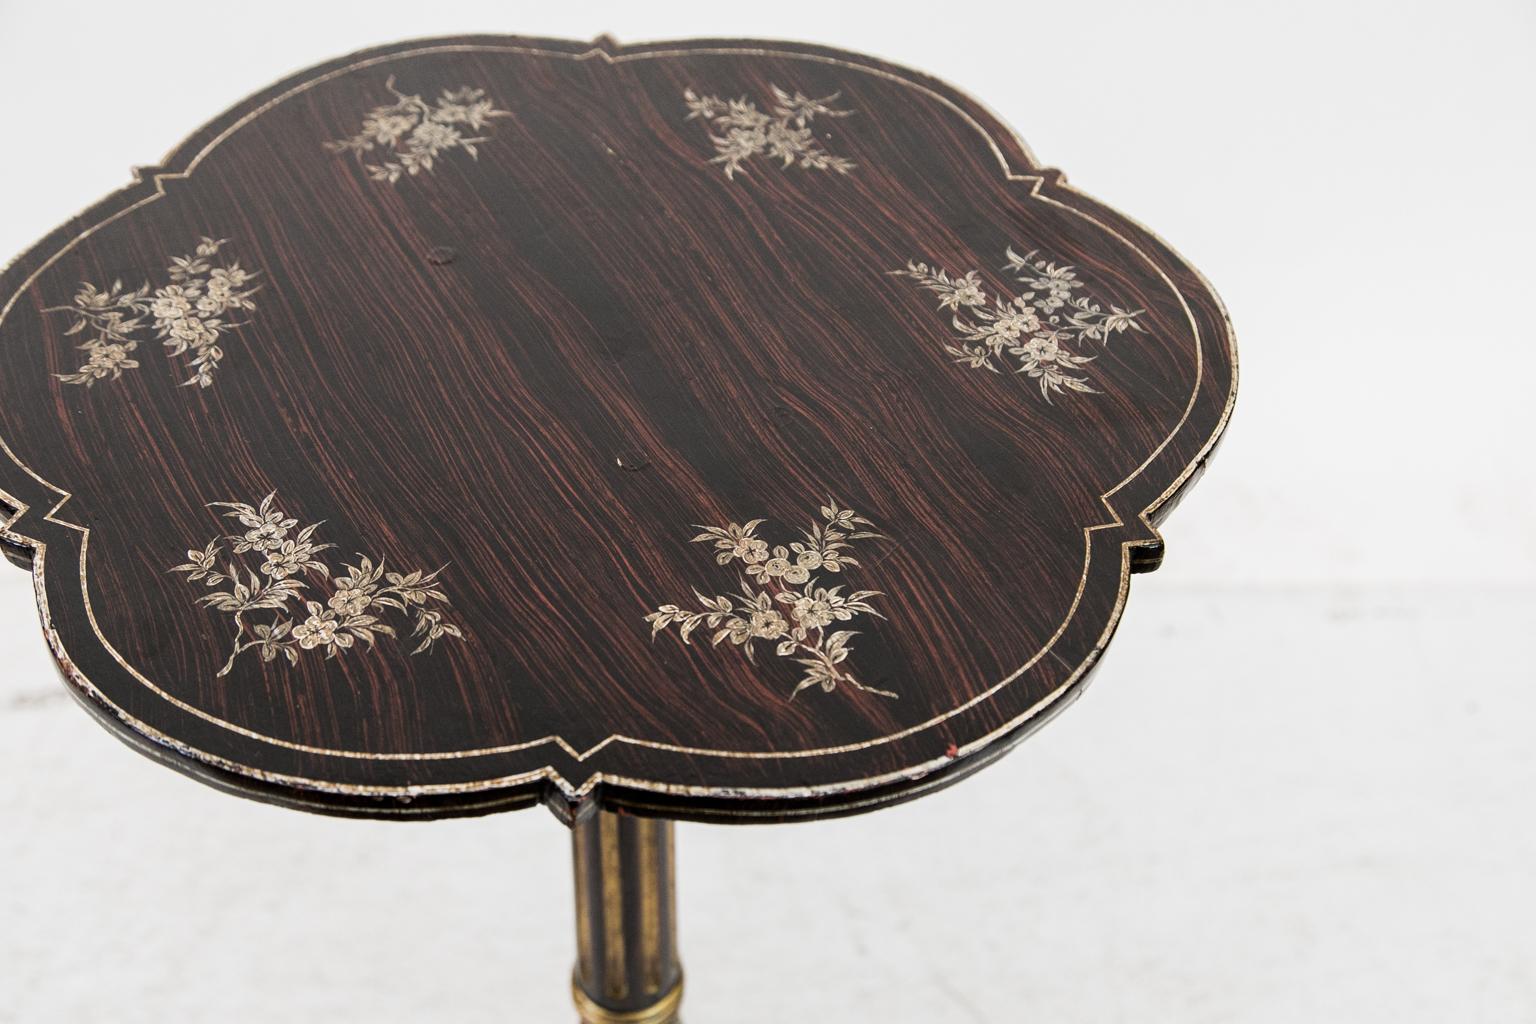 This tripod table is faux painted to simulate wood grain all over. The top is painted with floral sprays and simulated double line inlay on the border. The upper stem is fluted and highlighted with gold. The lower stem has a shallow knop carved with